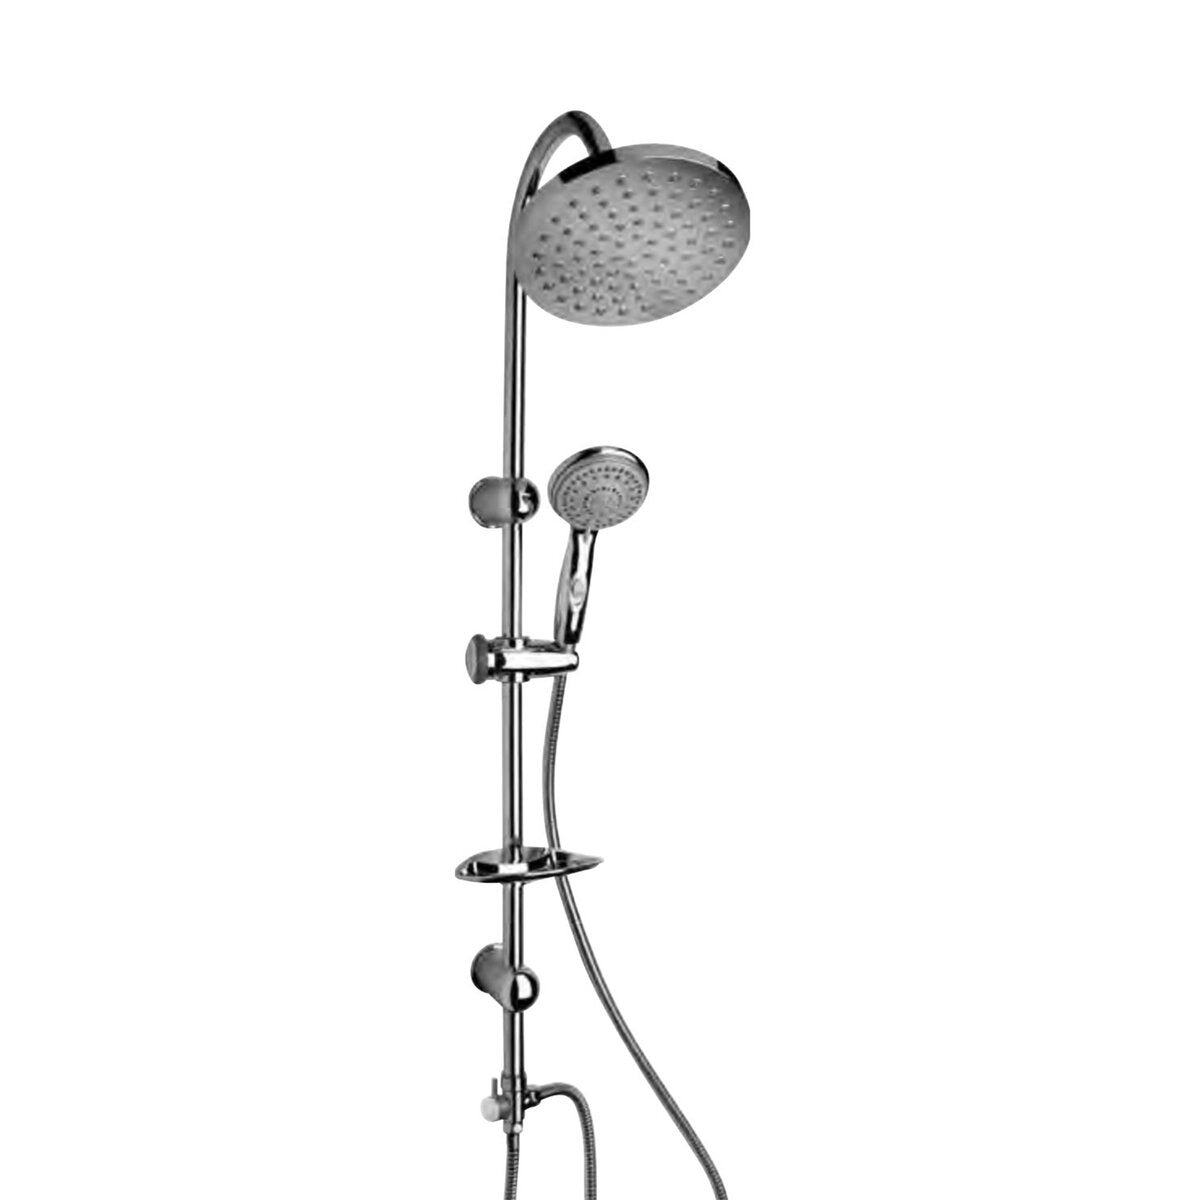 Piralla Elba shower column adjustable to existing holes with Eco-Stop